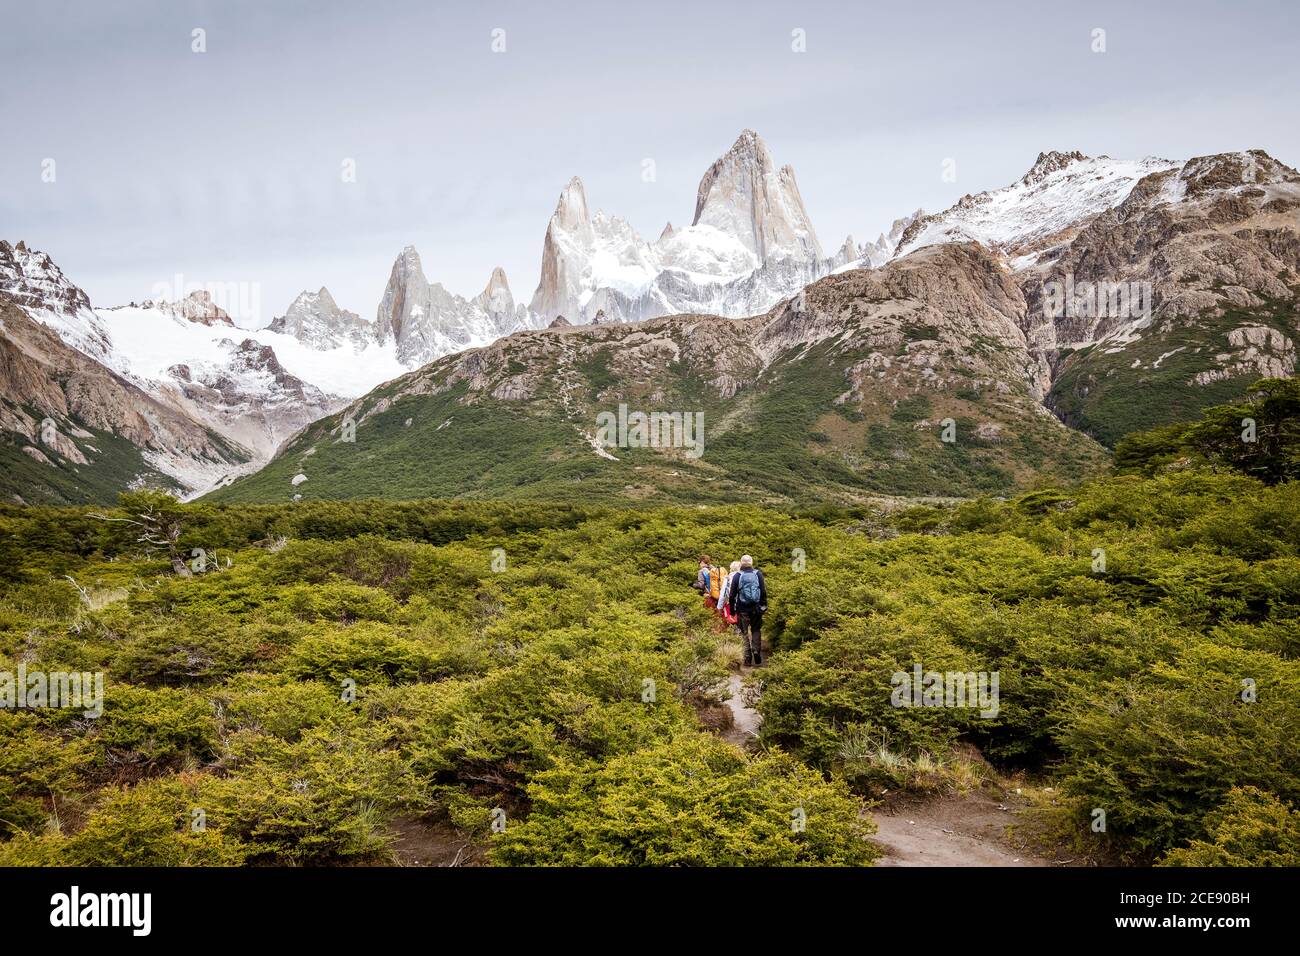 Hikers attempting to climb Fitz Roy mountain. Stock Photo